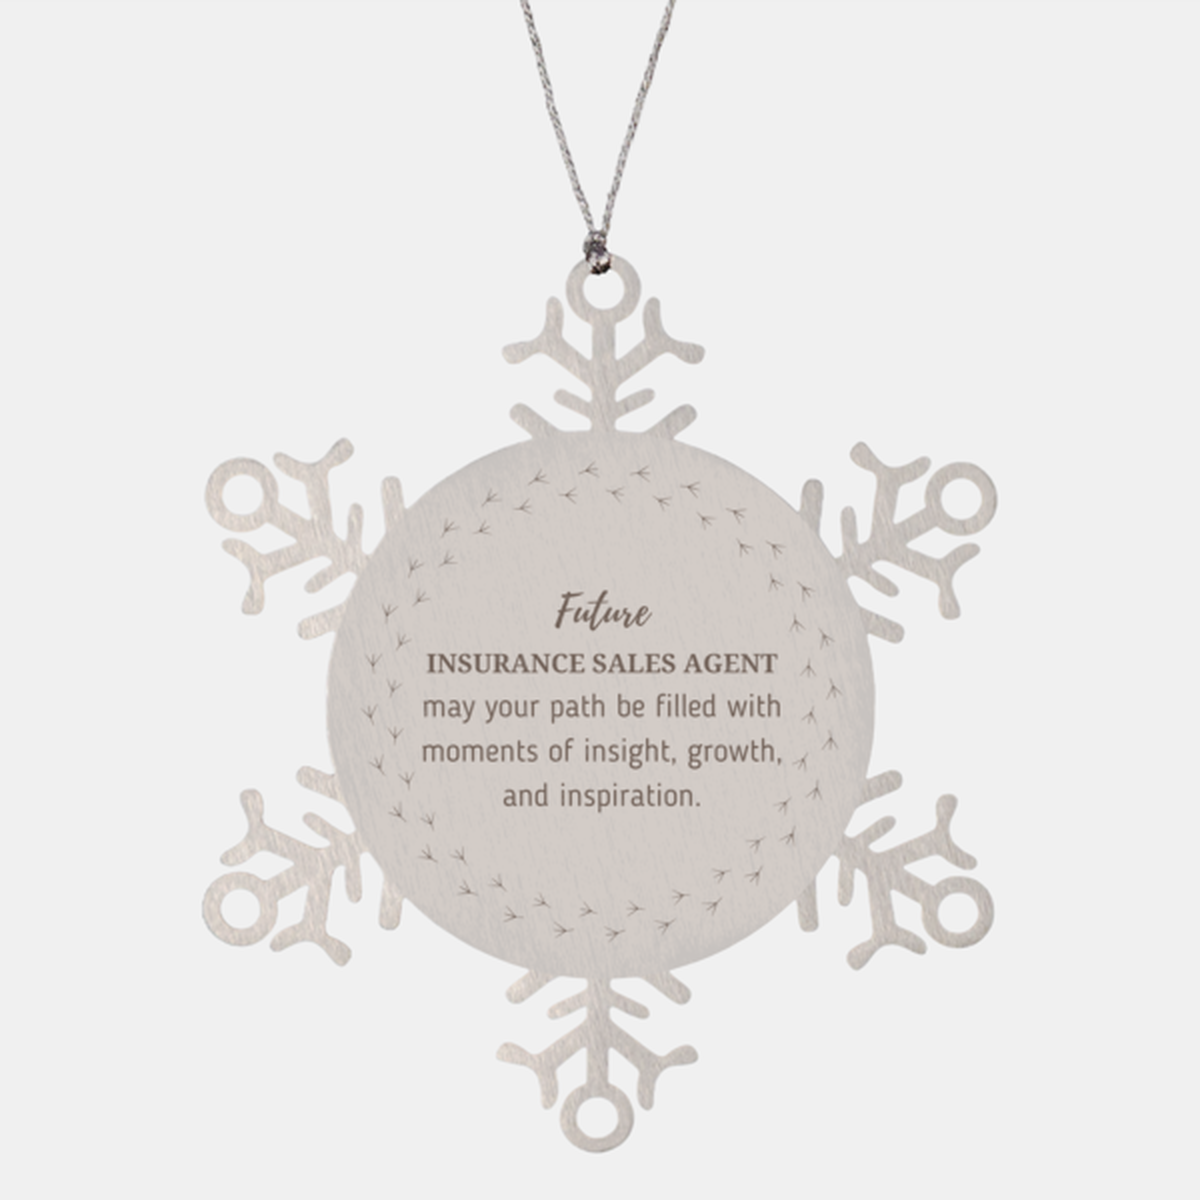 Future Insurance Sales Agent Gifts, May your path be filled with moments of insight, Graduation Gifts for New Insurance Sales Agent, Christmas Unique Snowflake Ornament For Men, Women, Friends